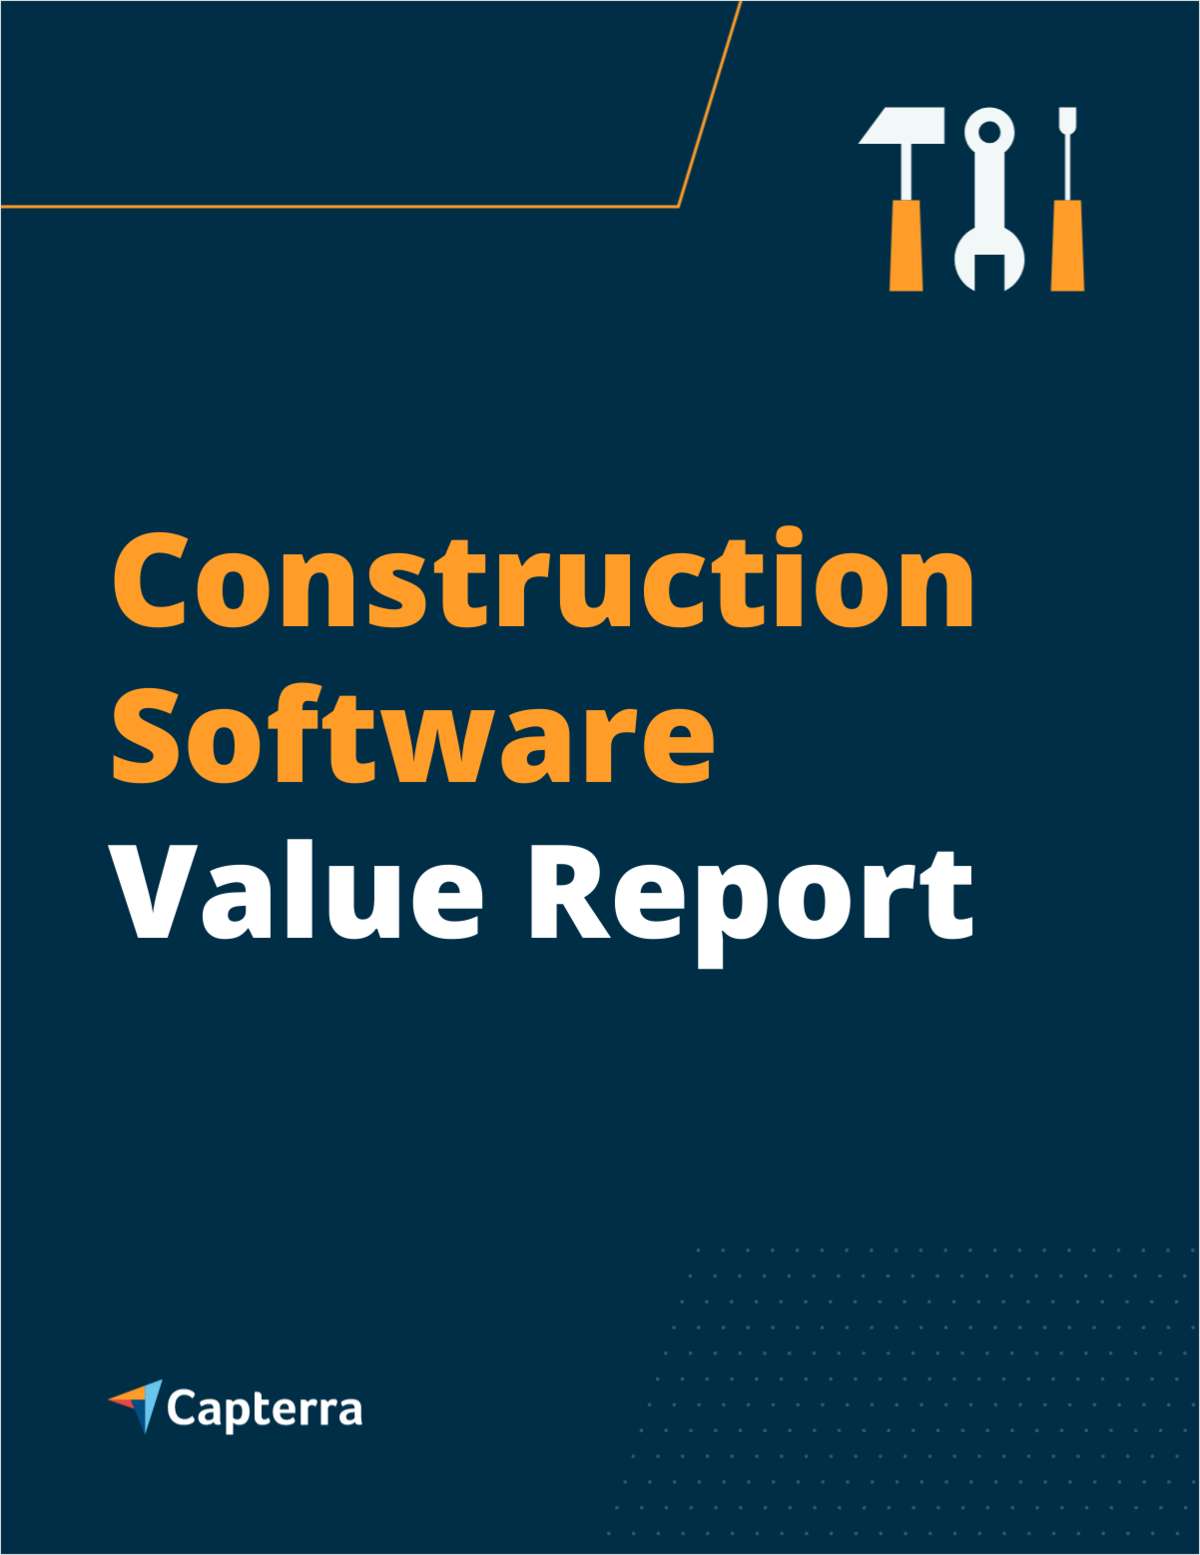 Value Report on Construction Software